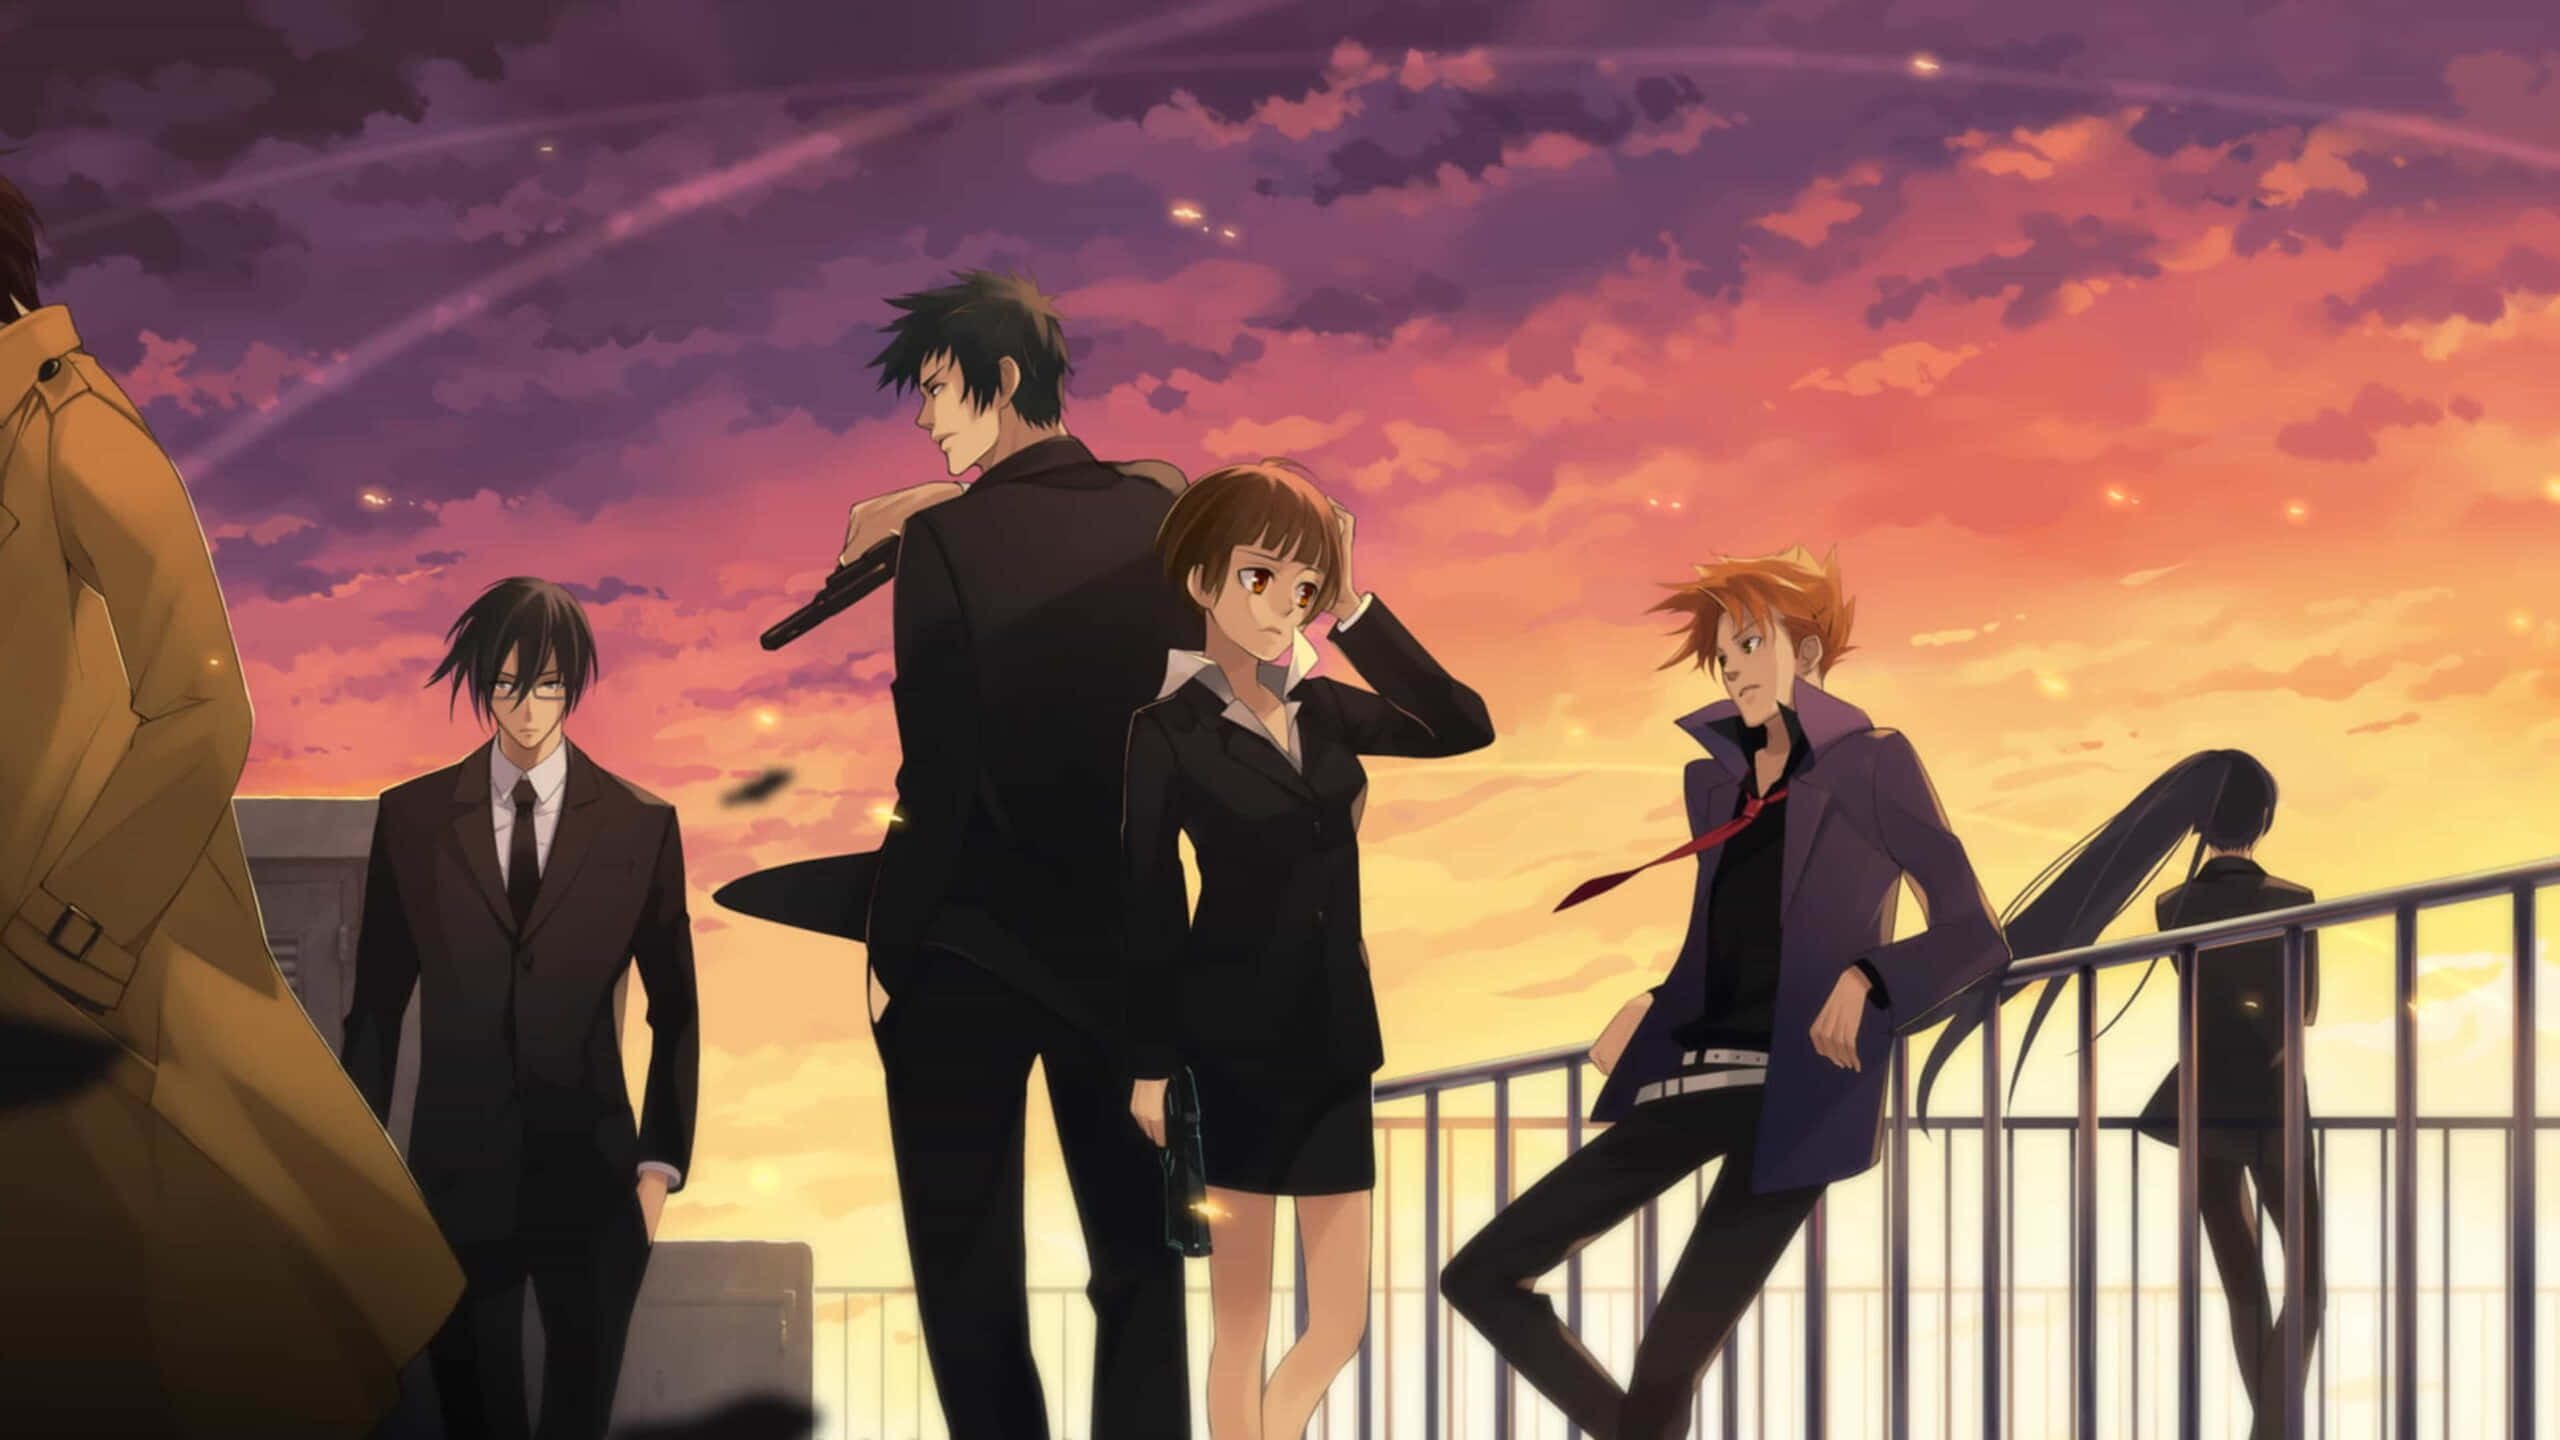 The Characters Of Psycho Pass Ready To Battle.